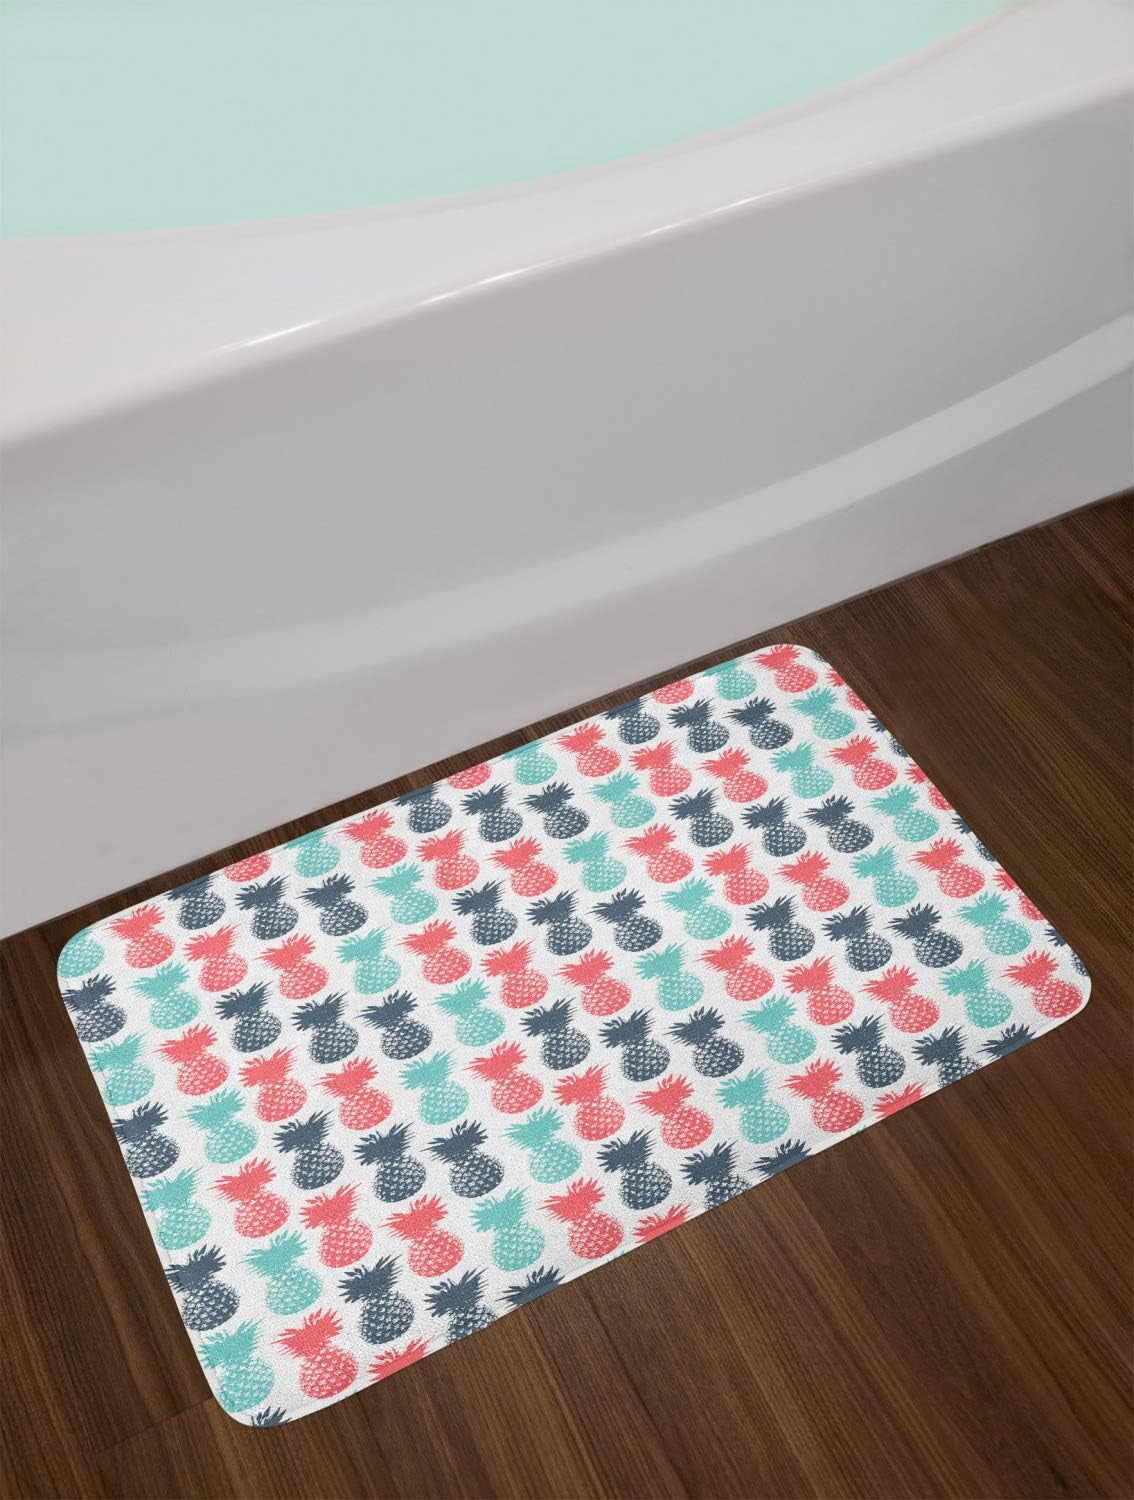 Summer Island Plush Pineapple Bathroom Decor Mat with Non Slip Backing, 30.2" X 20", Turquoise White Coral